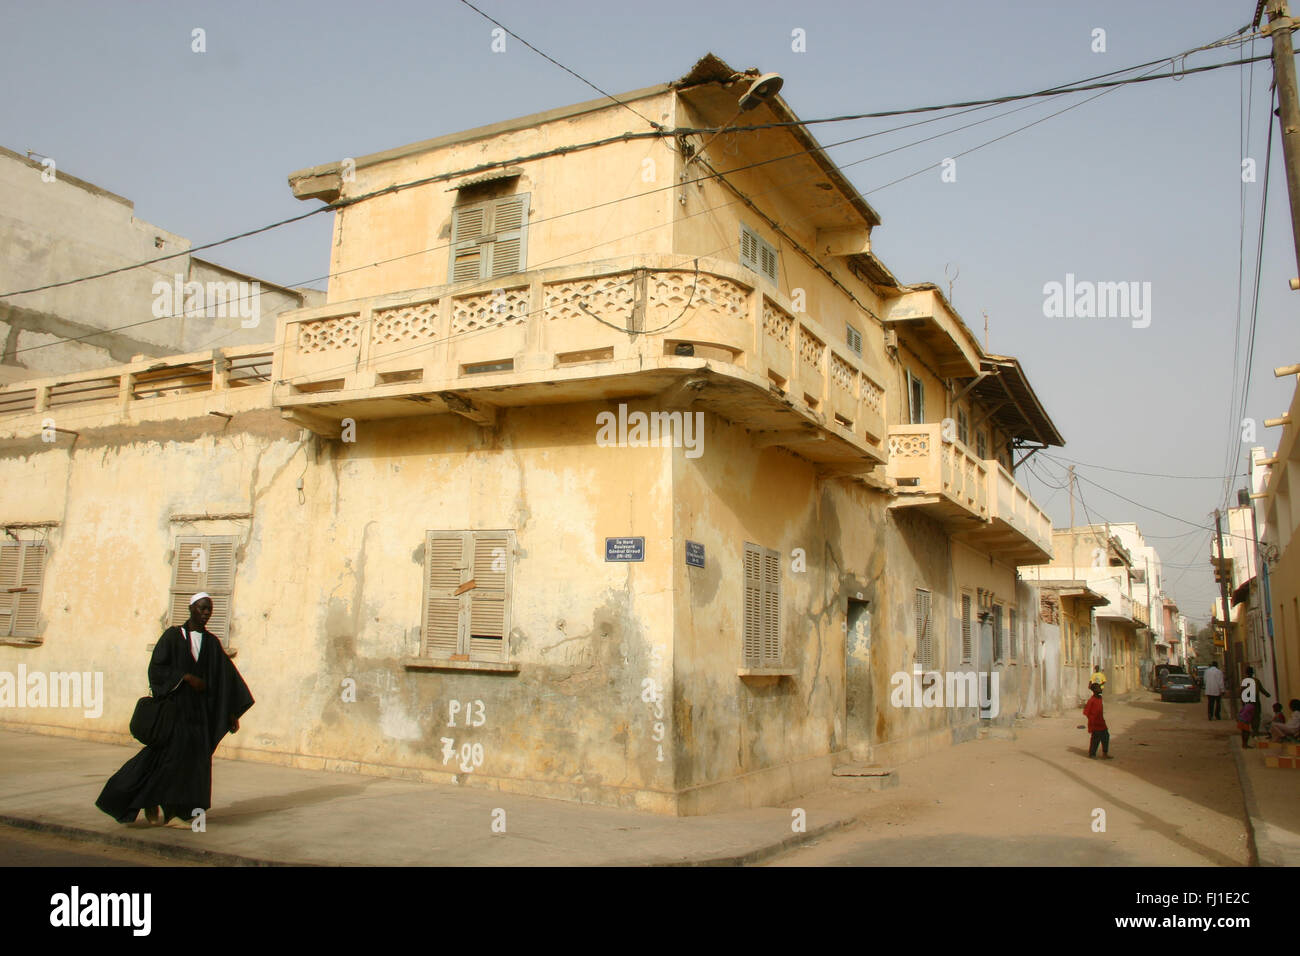 Traditional colorful architecture in Saint-Louis, former capital of Senegal  Stock Photo - Alamy